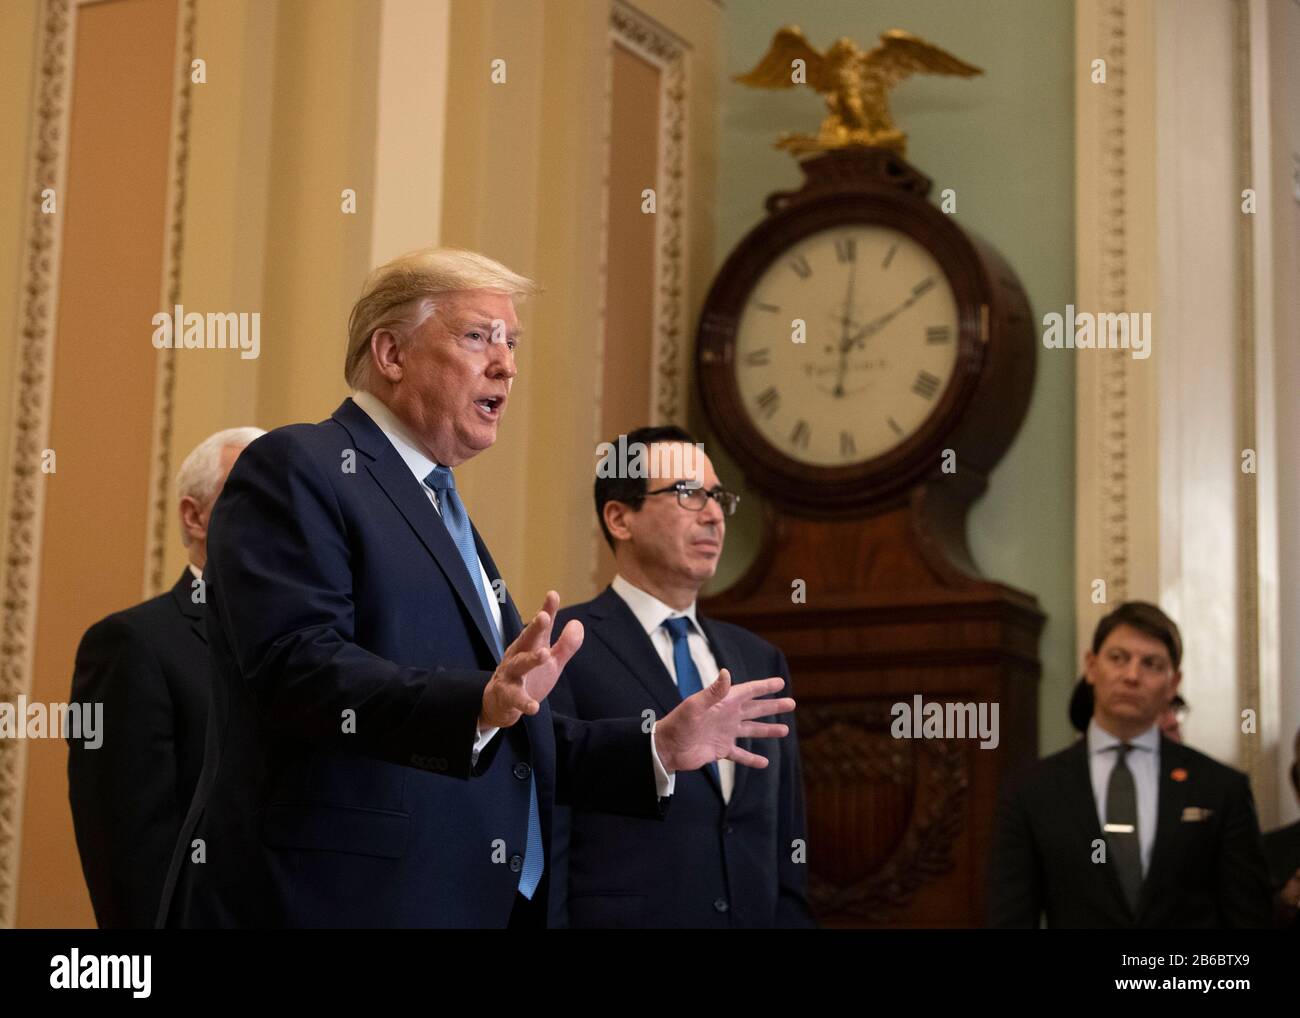 President Donald Trump (C), joined by Treasury Secretary Steven Mnuchin, speaks after meeting with Senate Republicans on a possible economic package in the wake of market turbulence caused by the Coronavirus, on in Washington, DC on March 10, 2020. Credit: Kevin Dietsch/Pool via CNP /MediaPunch Stock Photo